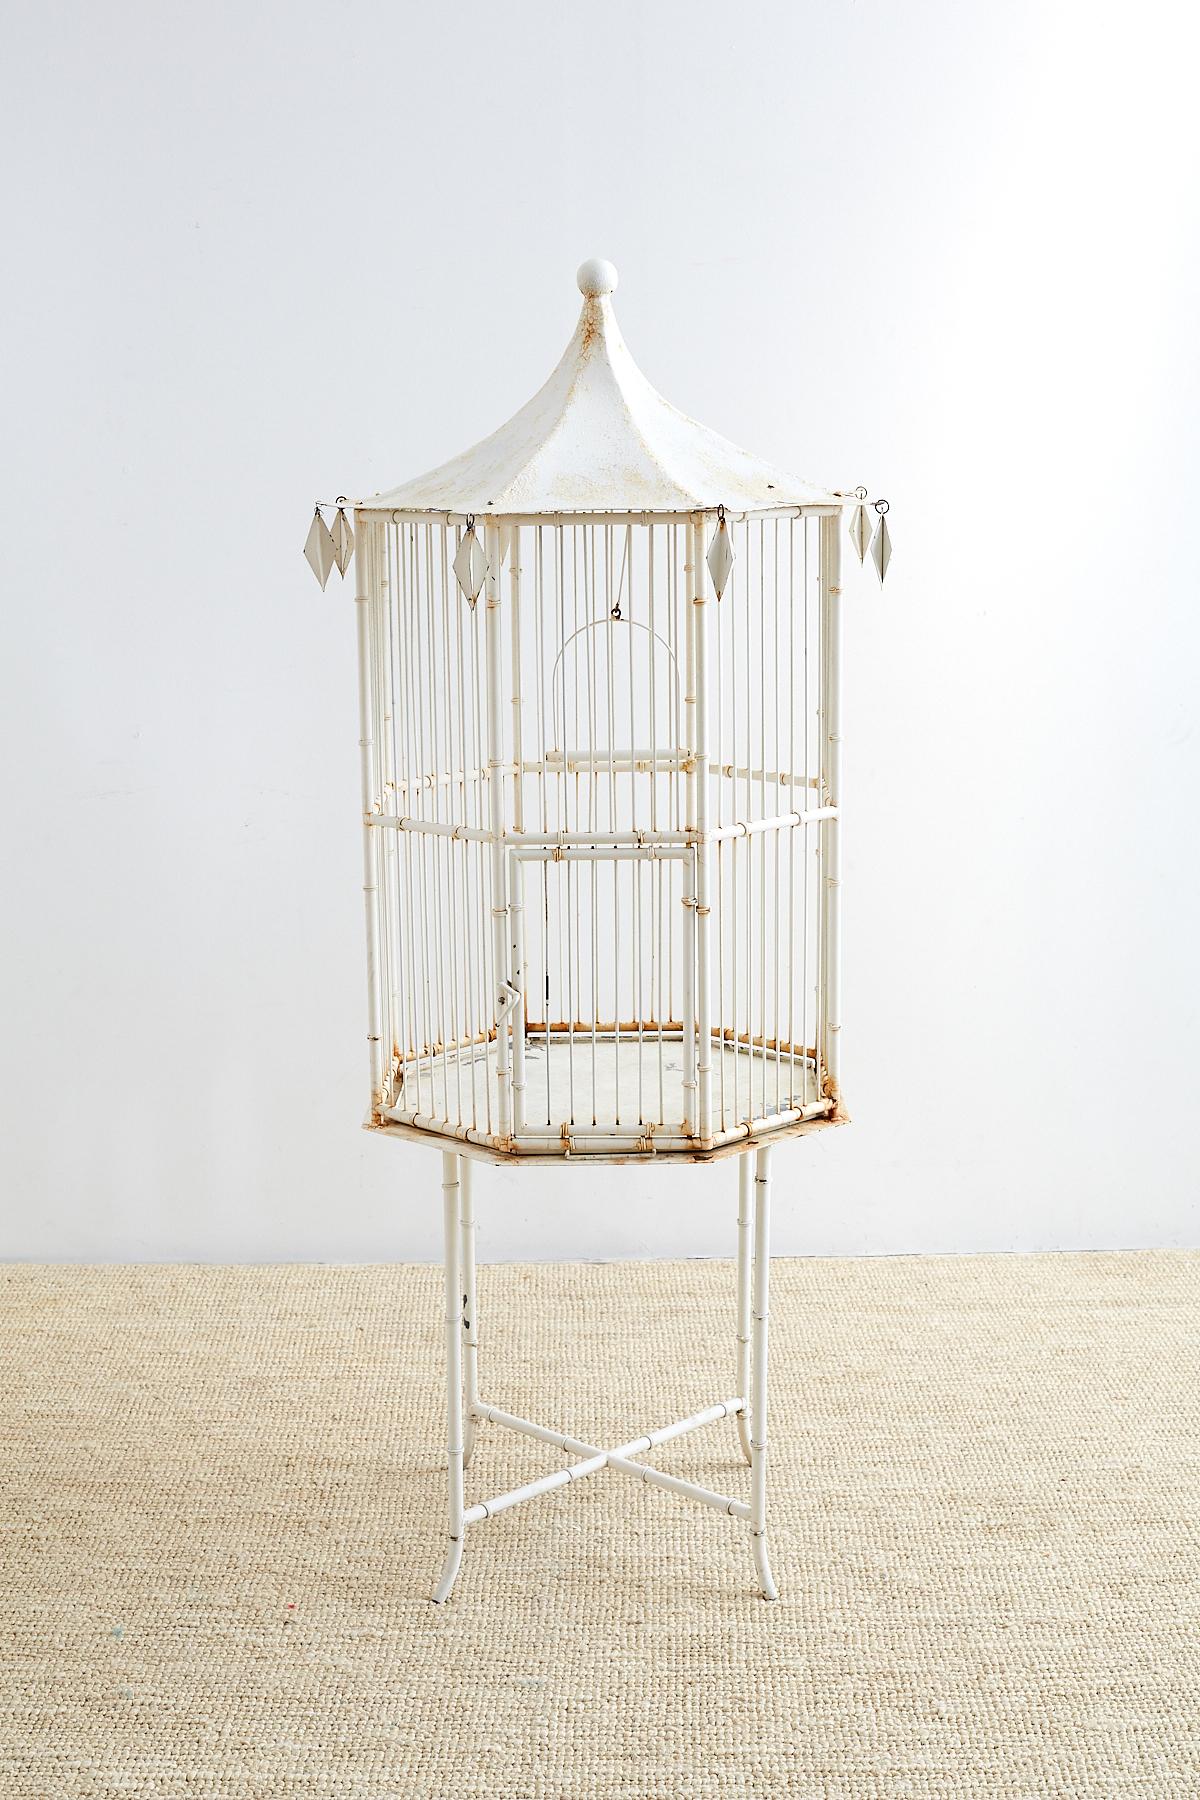 Fantastic faux bamboo pagoda birdcage made in the chinoiserie revival taste of the early 20th century Europe. Constructed from wrought iron featuring a decorative faux bamboo motif and topped with an octagonal Chinese pagoda style roof. The roof has